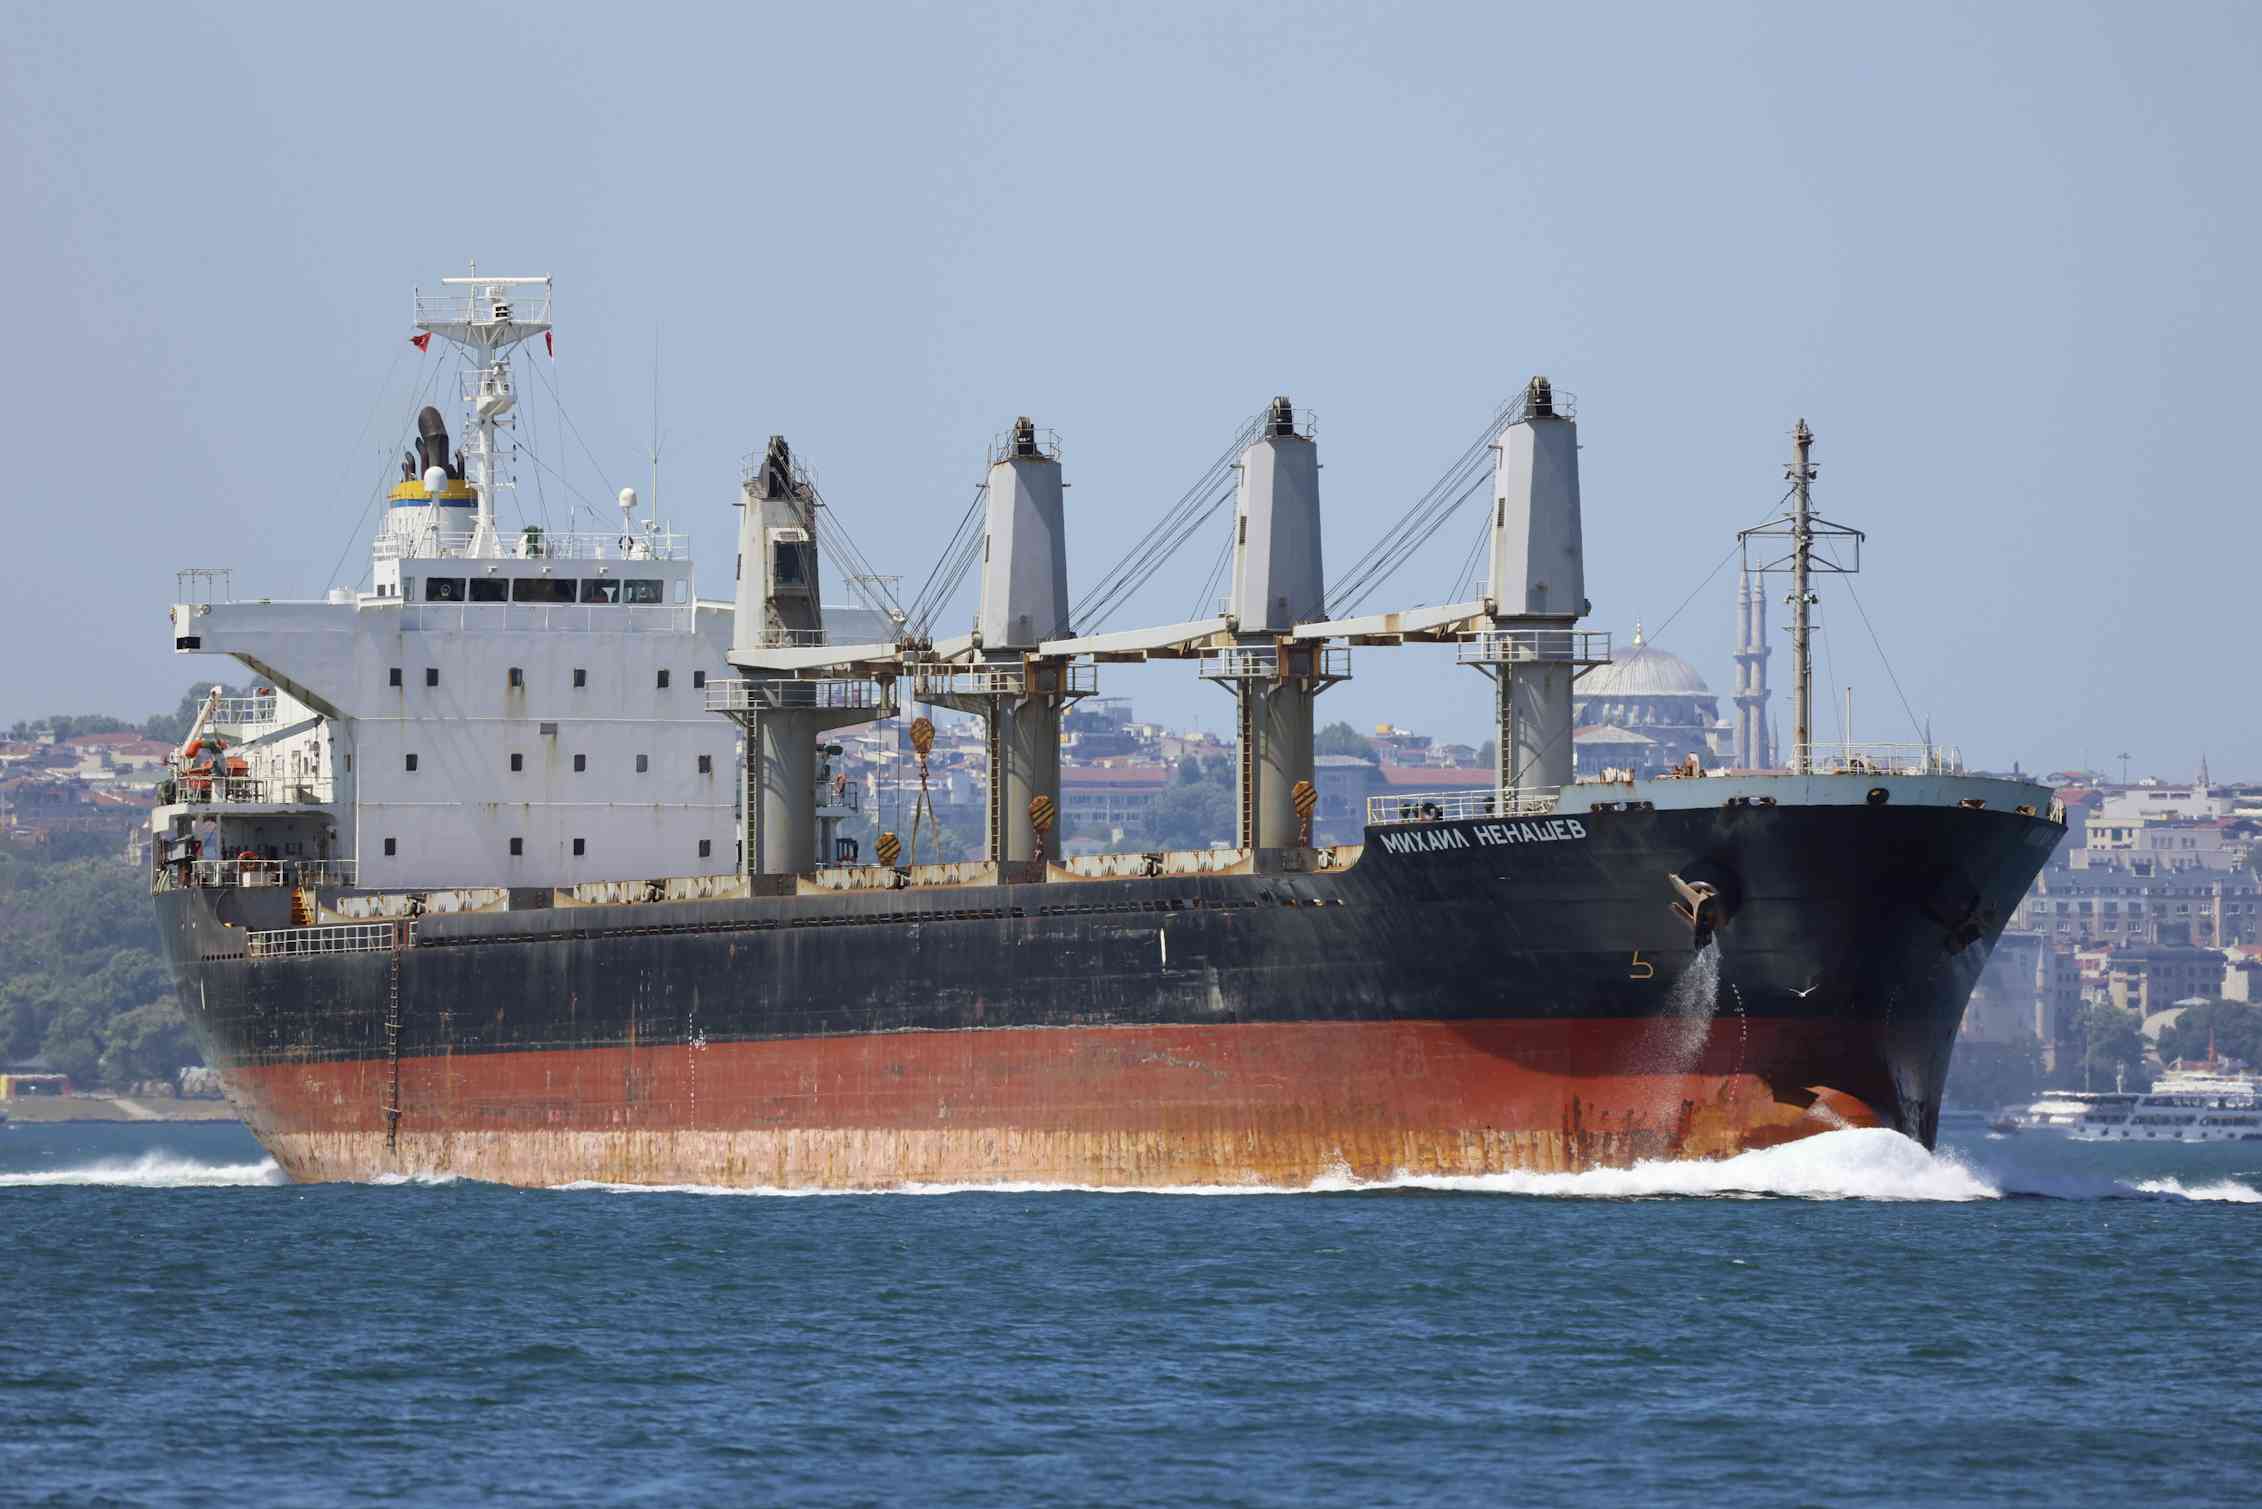 A large cargo ship with a rusty hull sails in a strait.